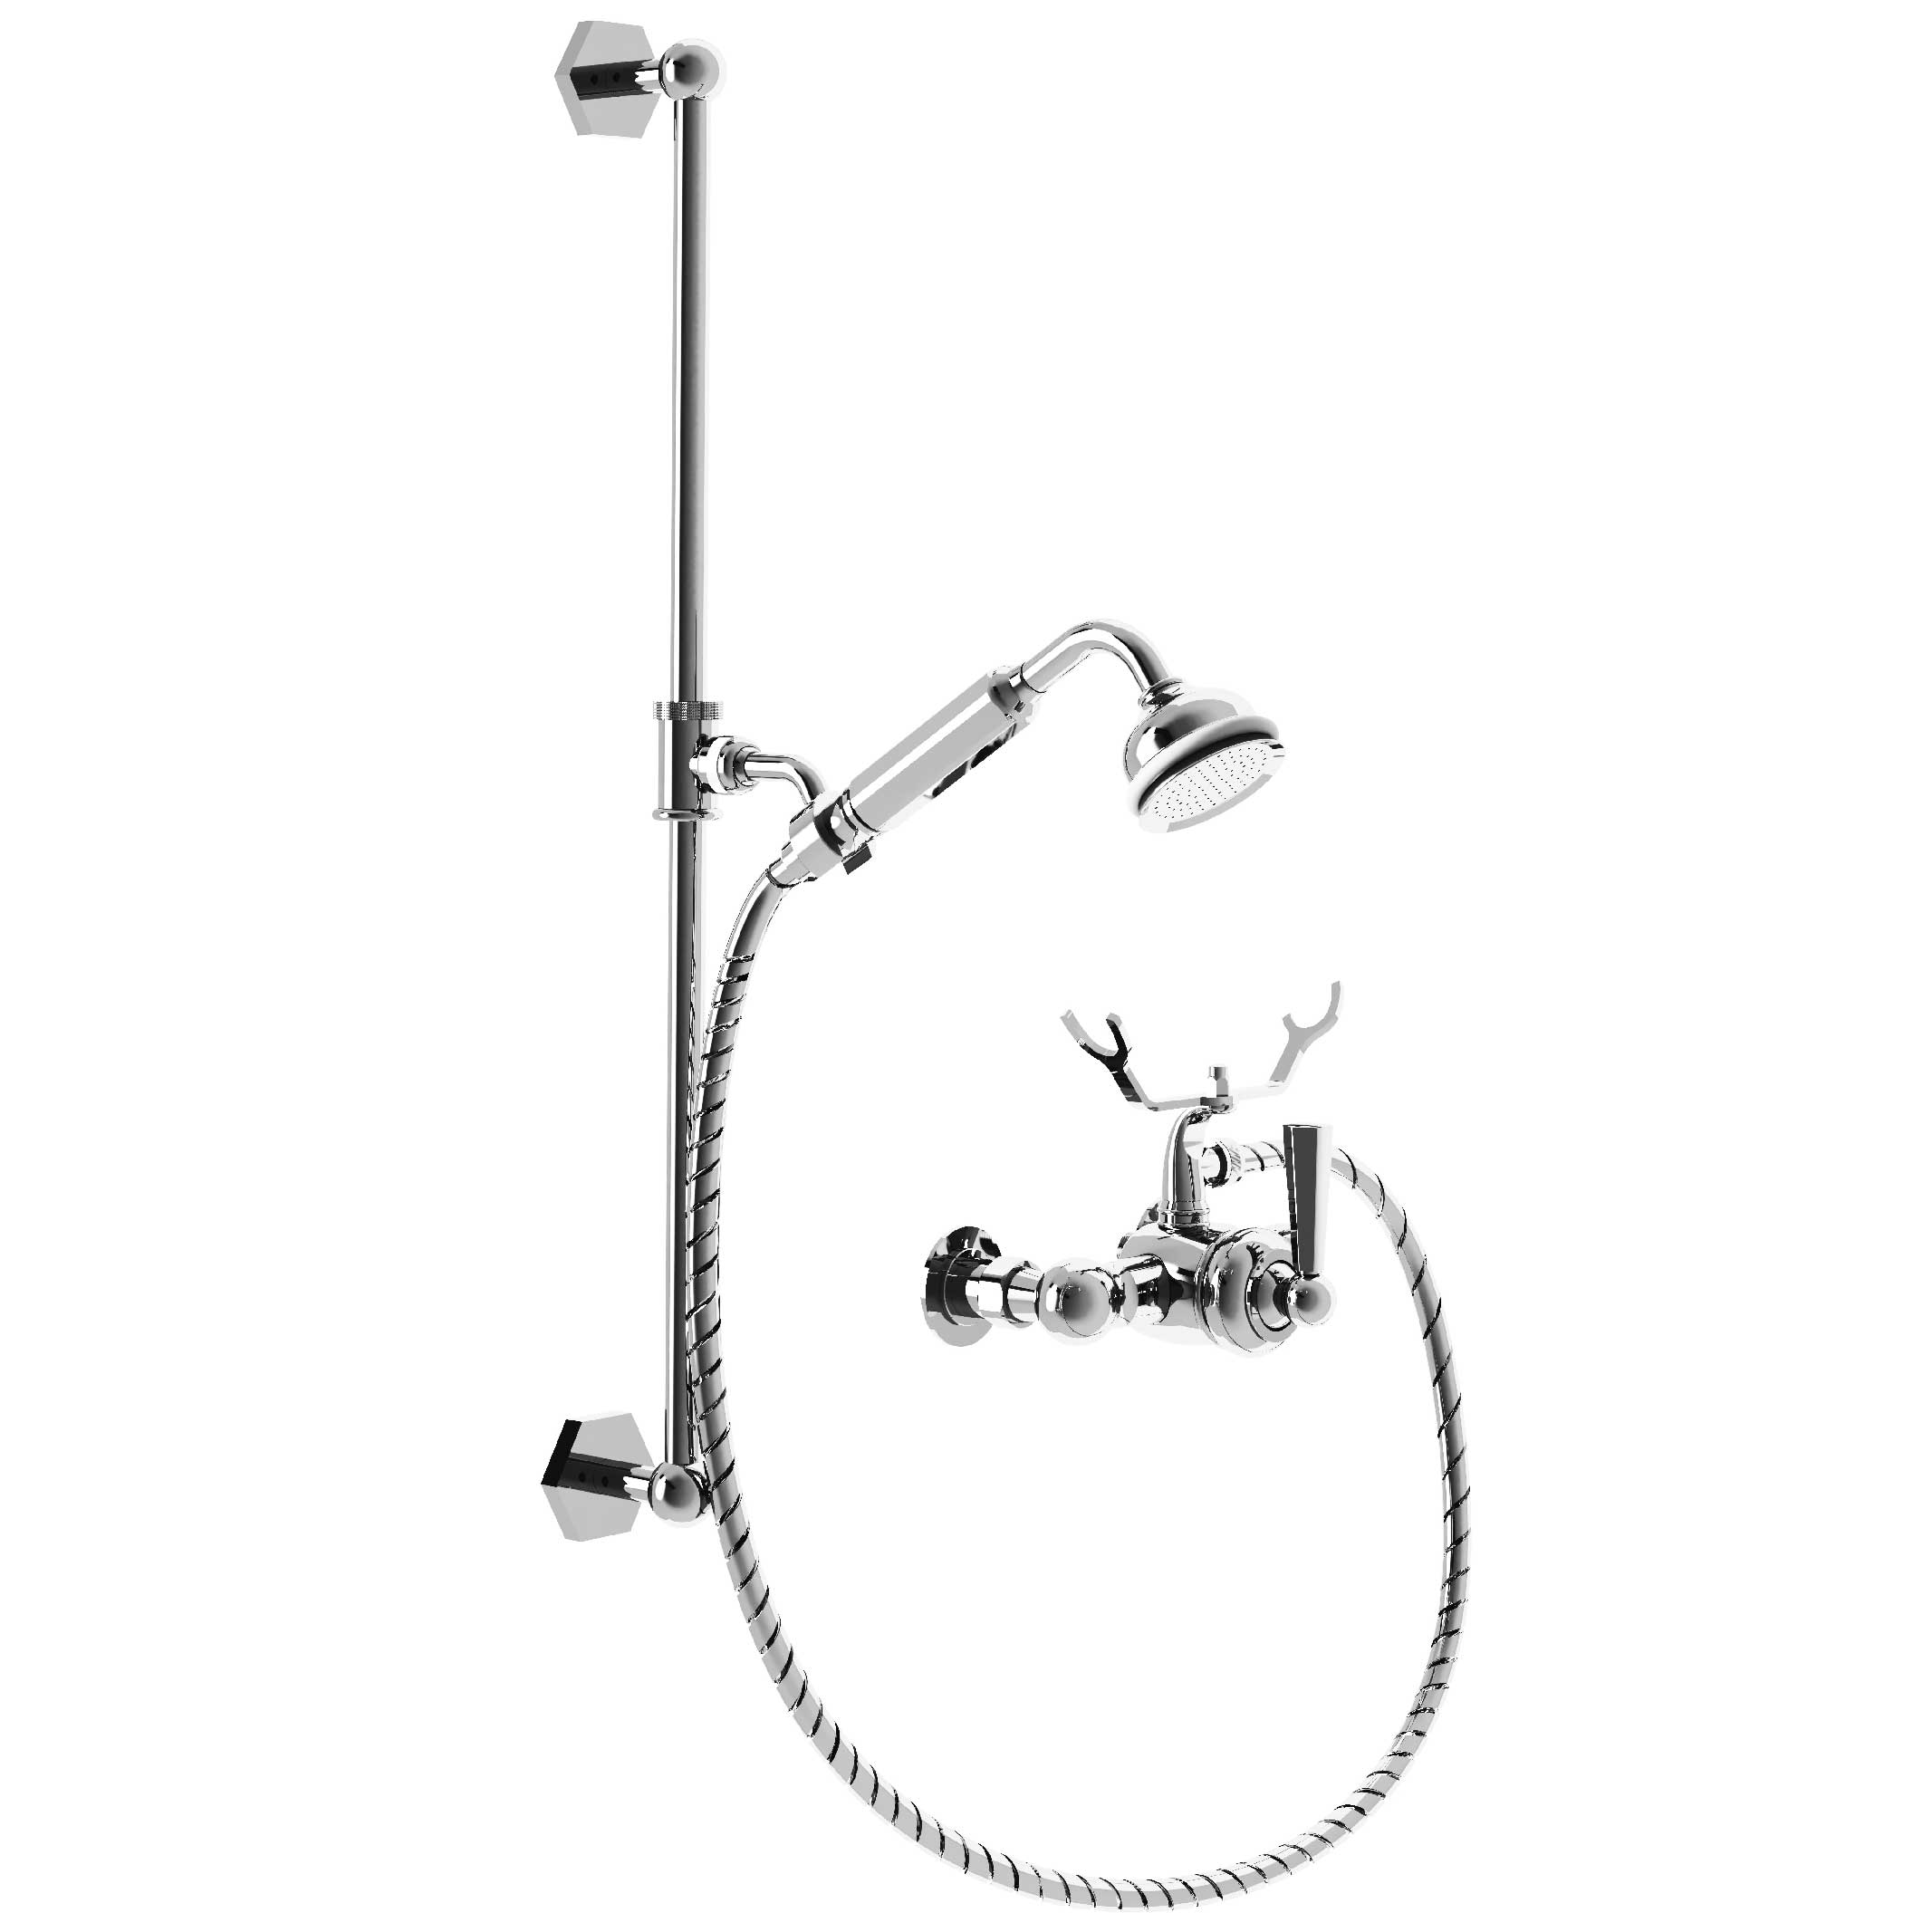 M39-2202M Single-lever shower mixer with sliding bar